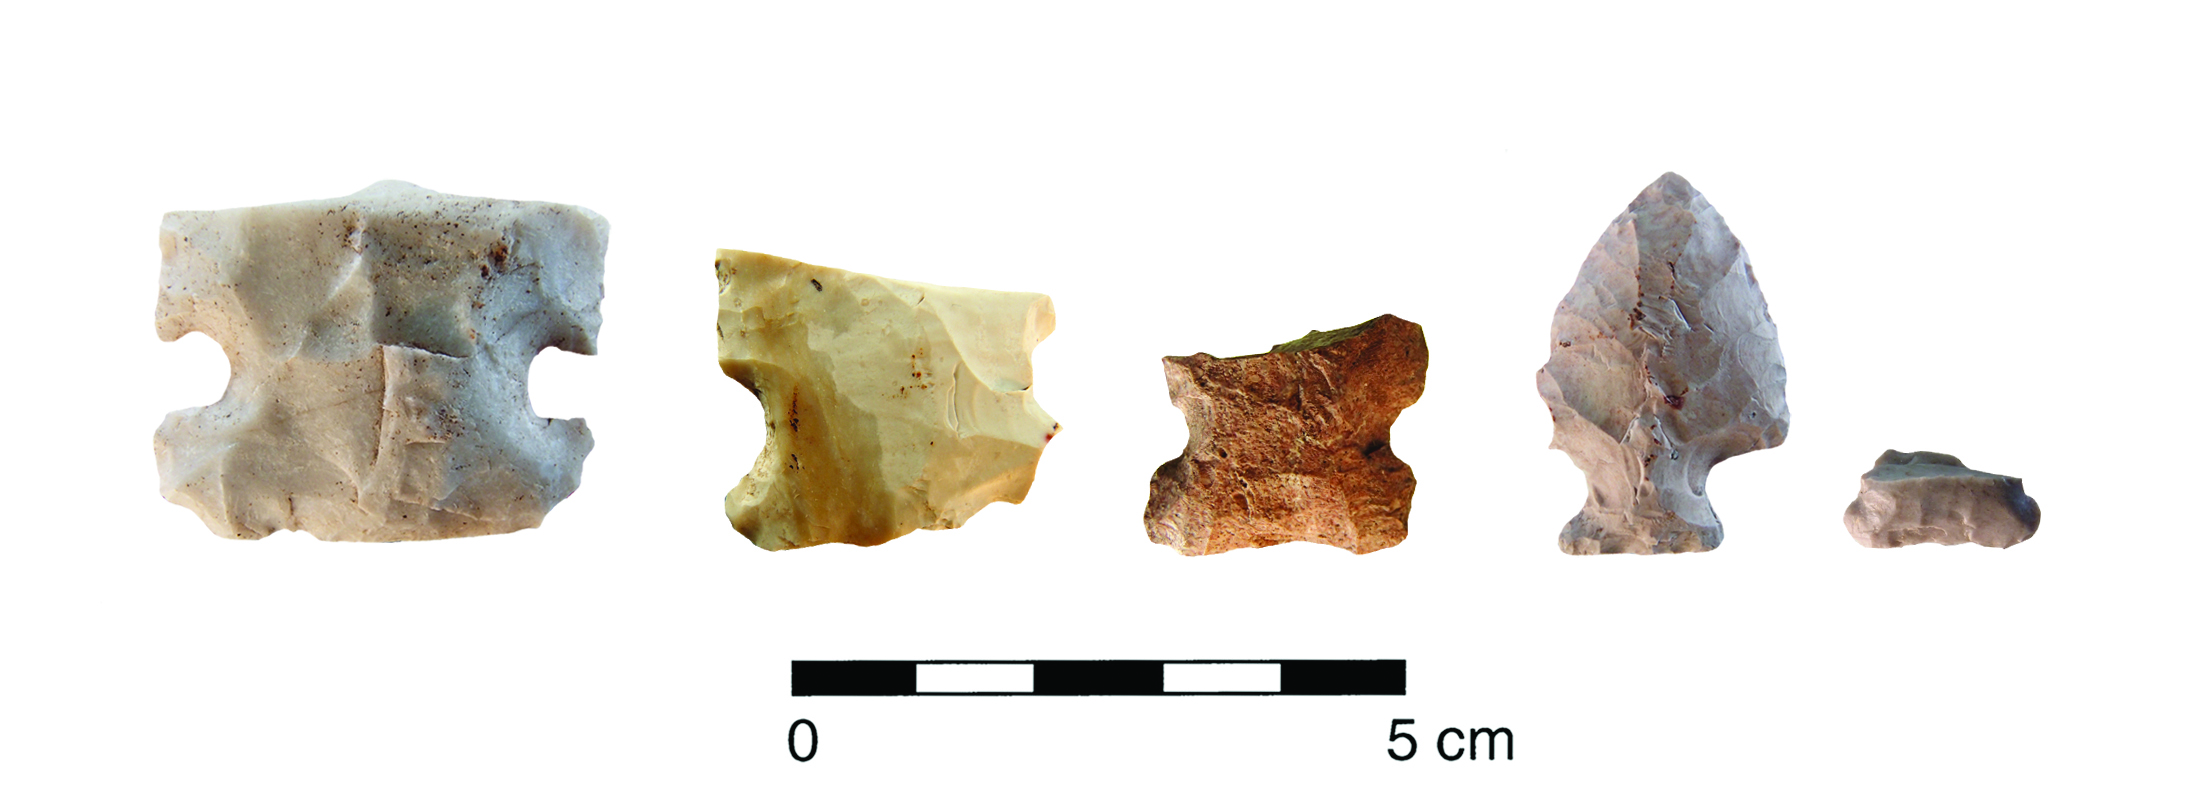 Selected Projectile Points from QCIA